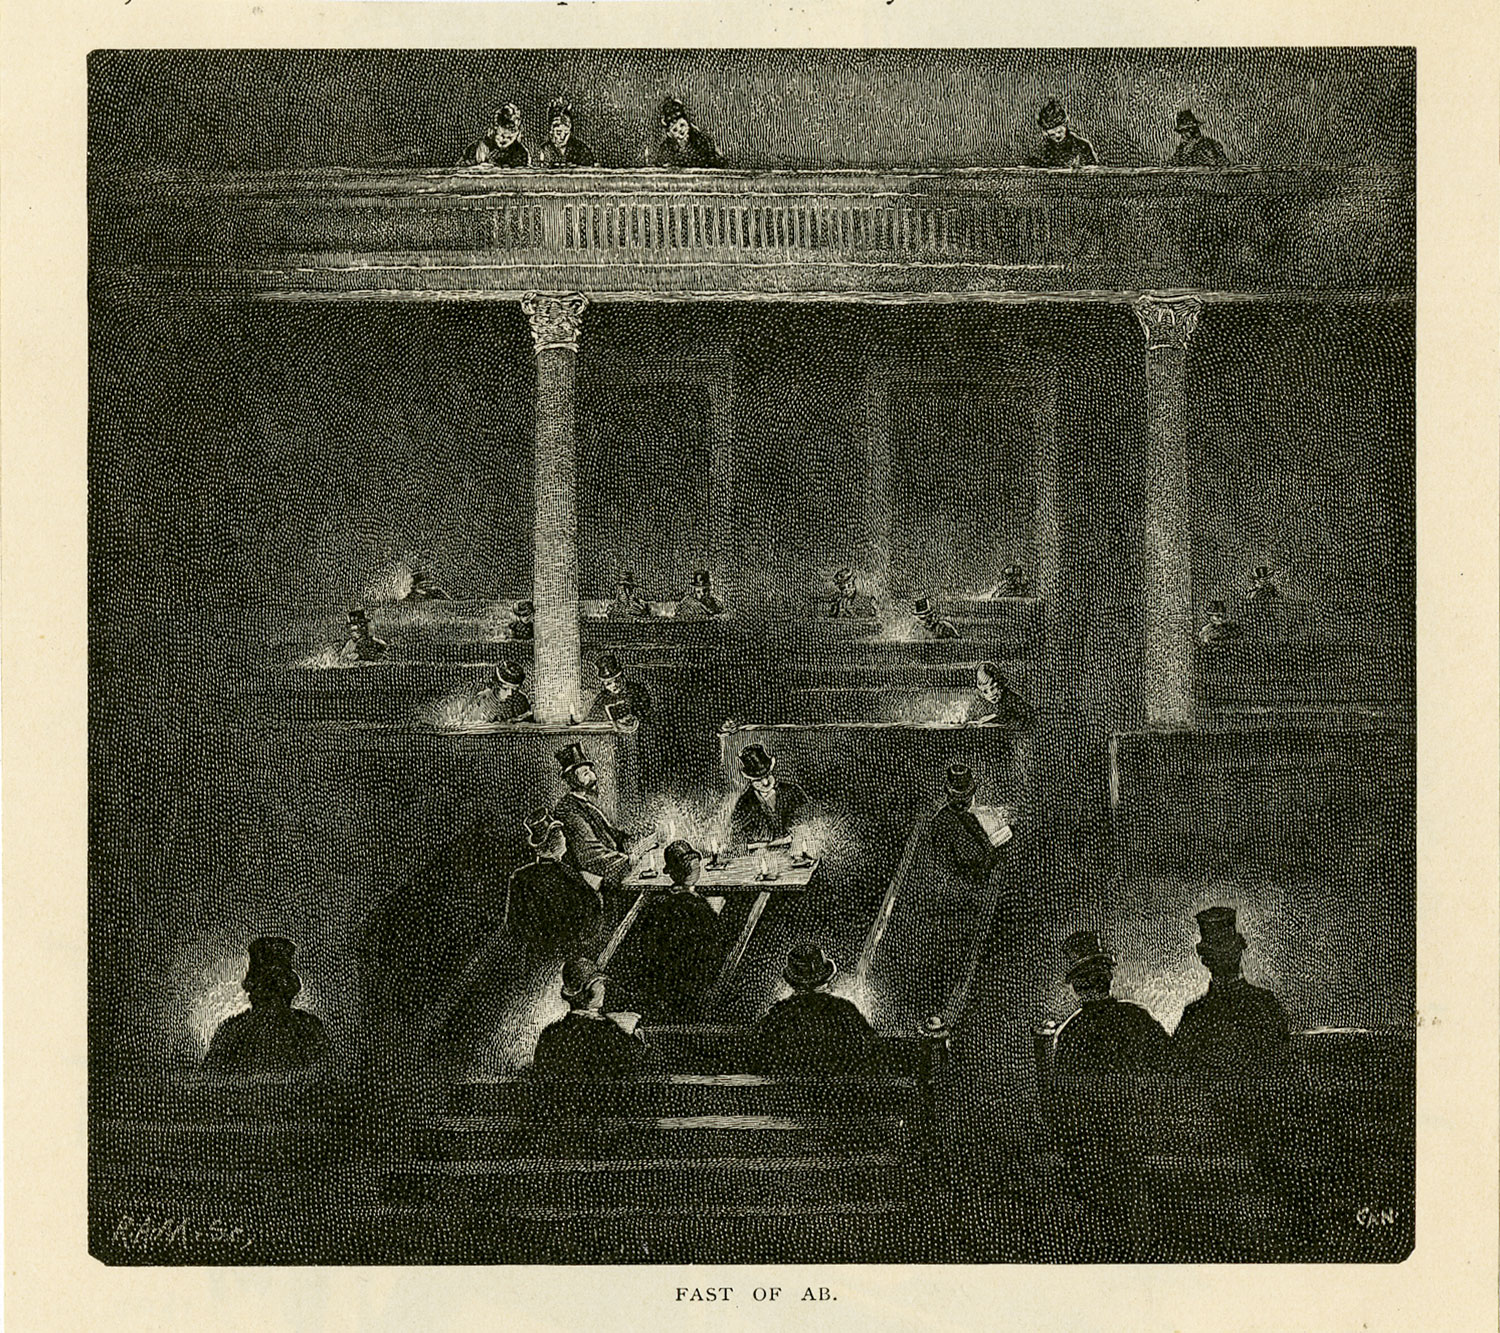 Engraving depicting the Feast of Ab